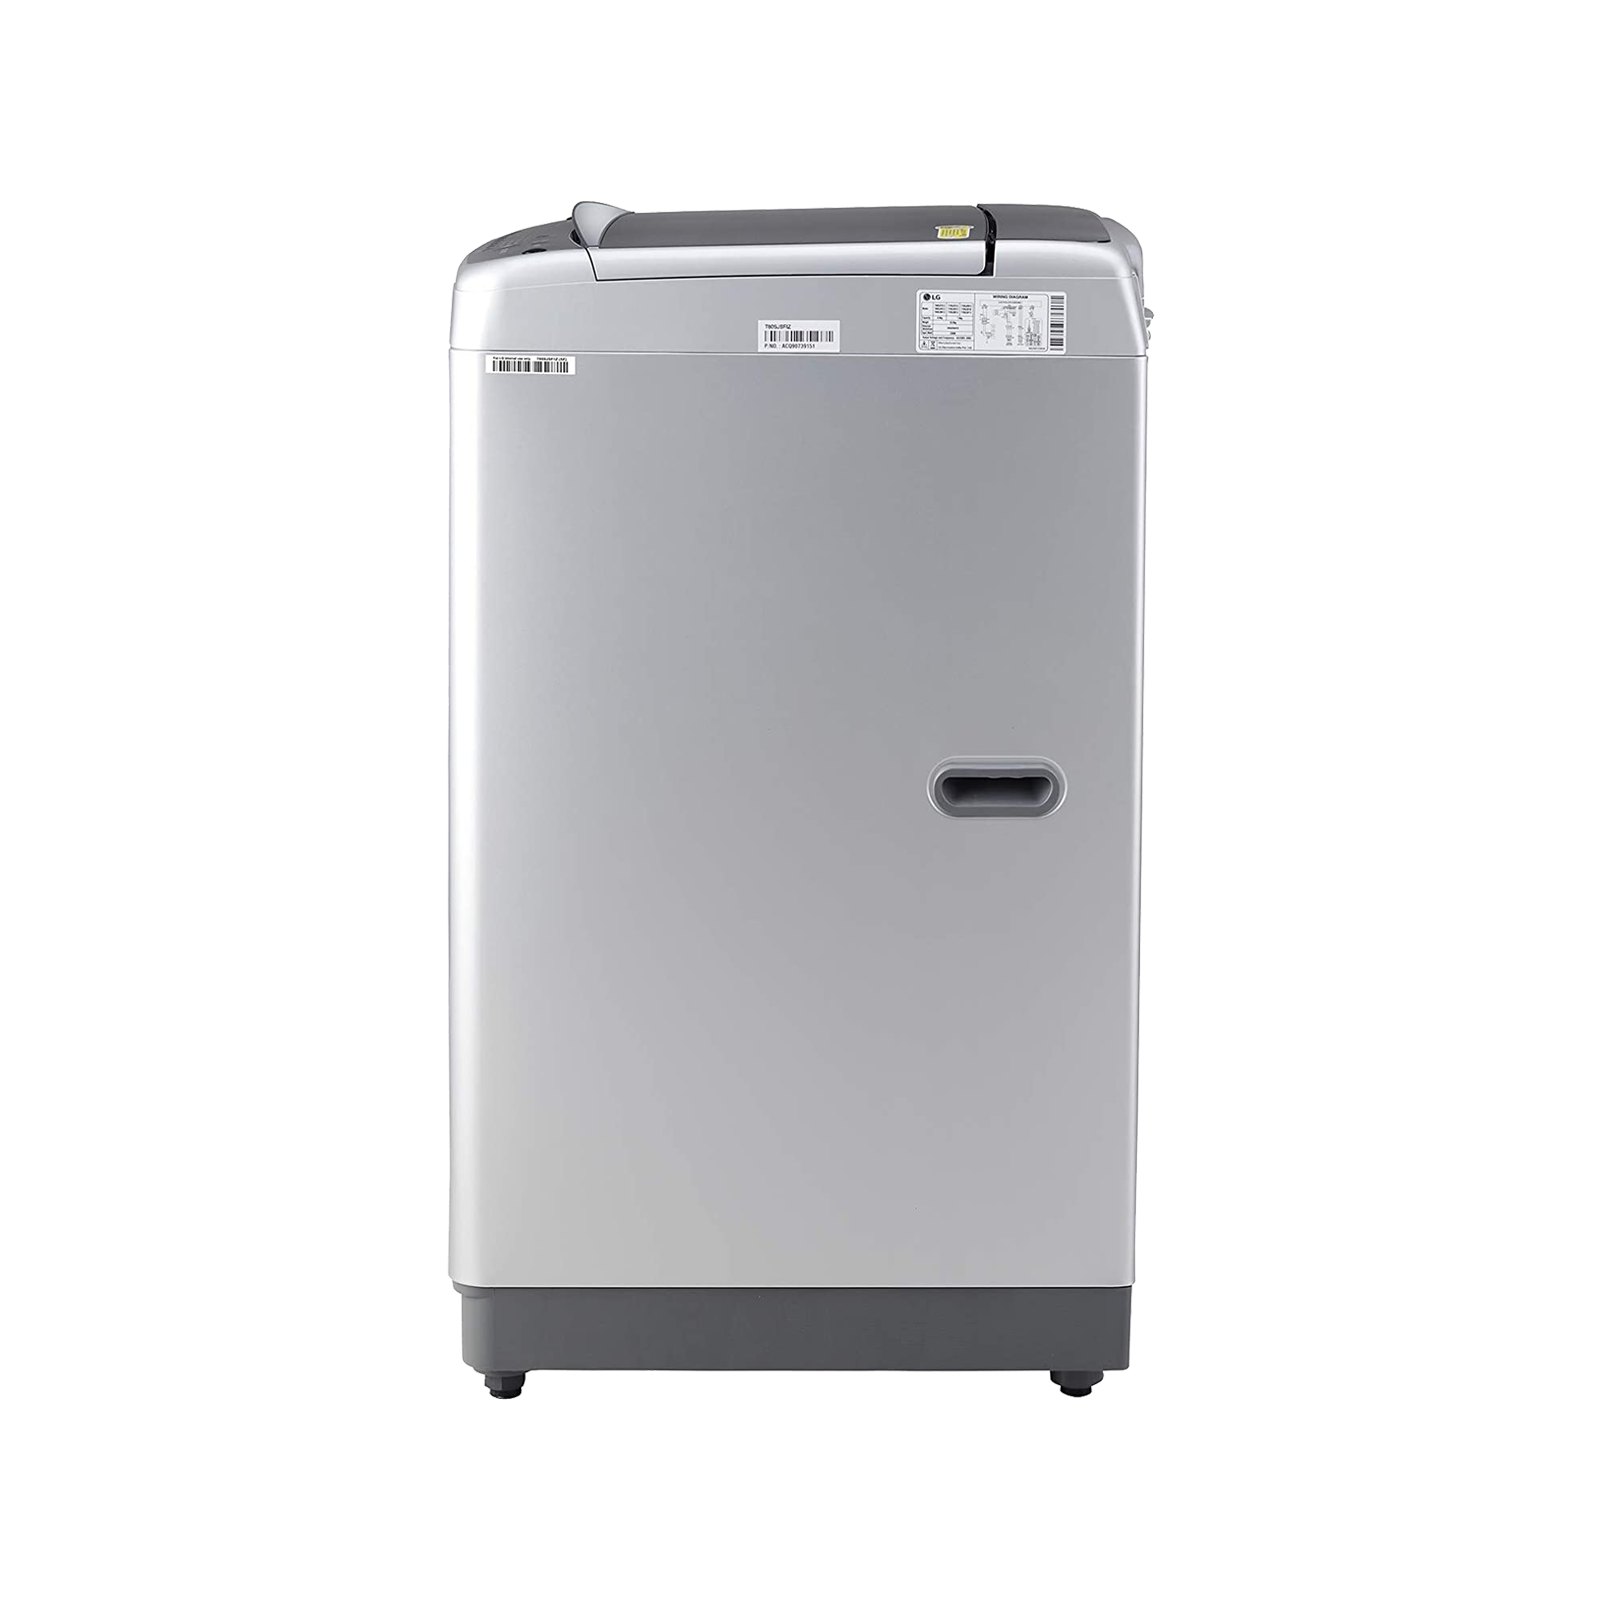 buy-lg-8-kg-5-star-inverter-fully-automatic-top-load-washing-machine